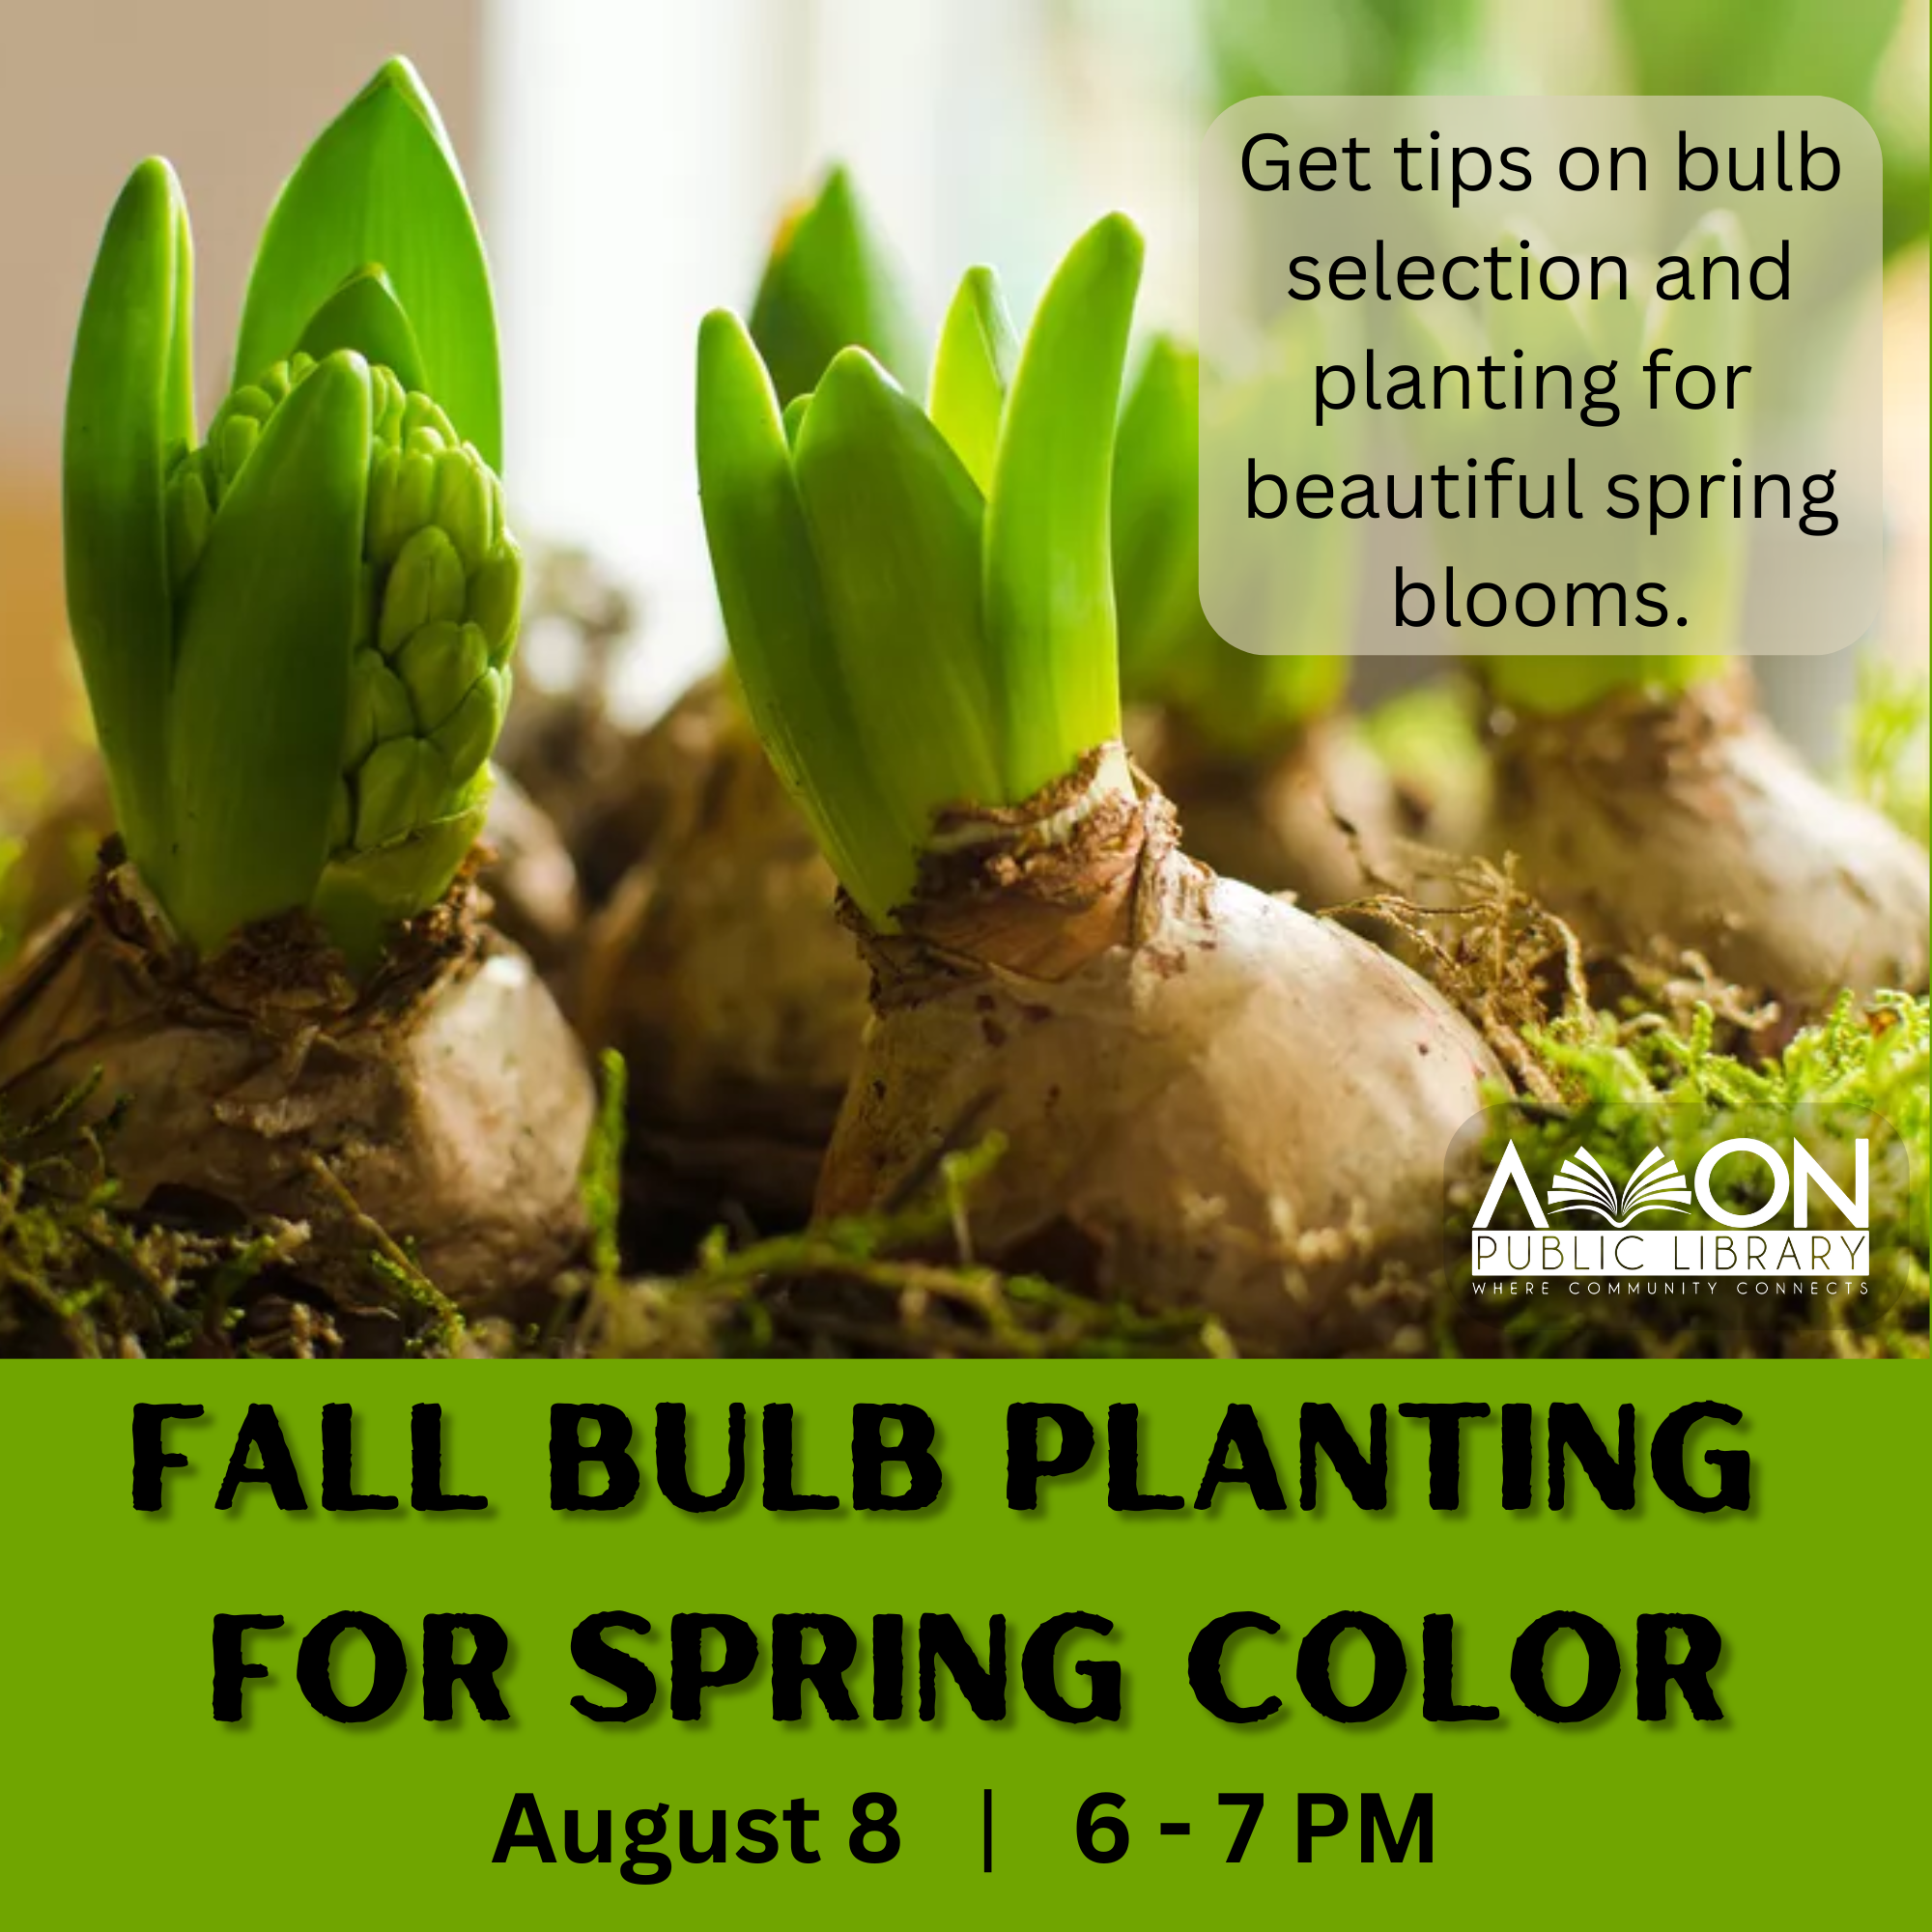 Fall bulb planting for spring color